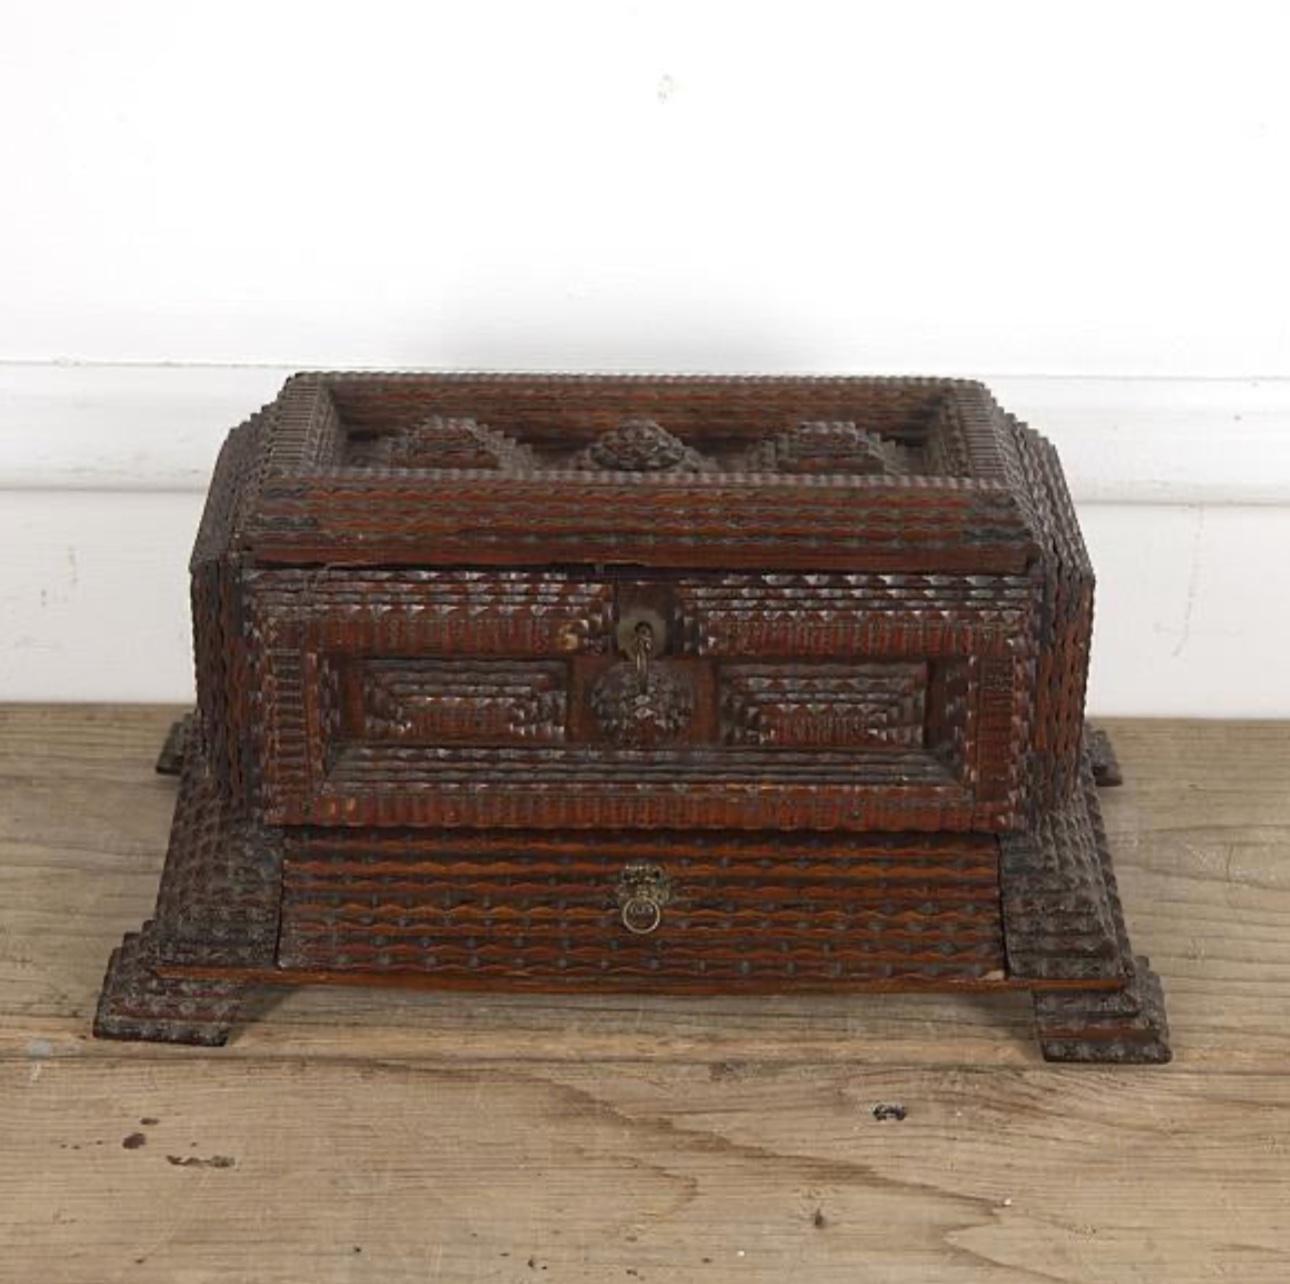 French tramp art box from the early 20th century. Tramp art is a style of folk art popular around the turn of the century that uses wood notch carving and found materials to incredible artistic effect. 

France, circa 1900

Dimensions: 6.5H x